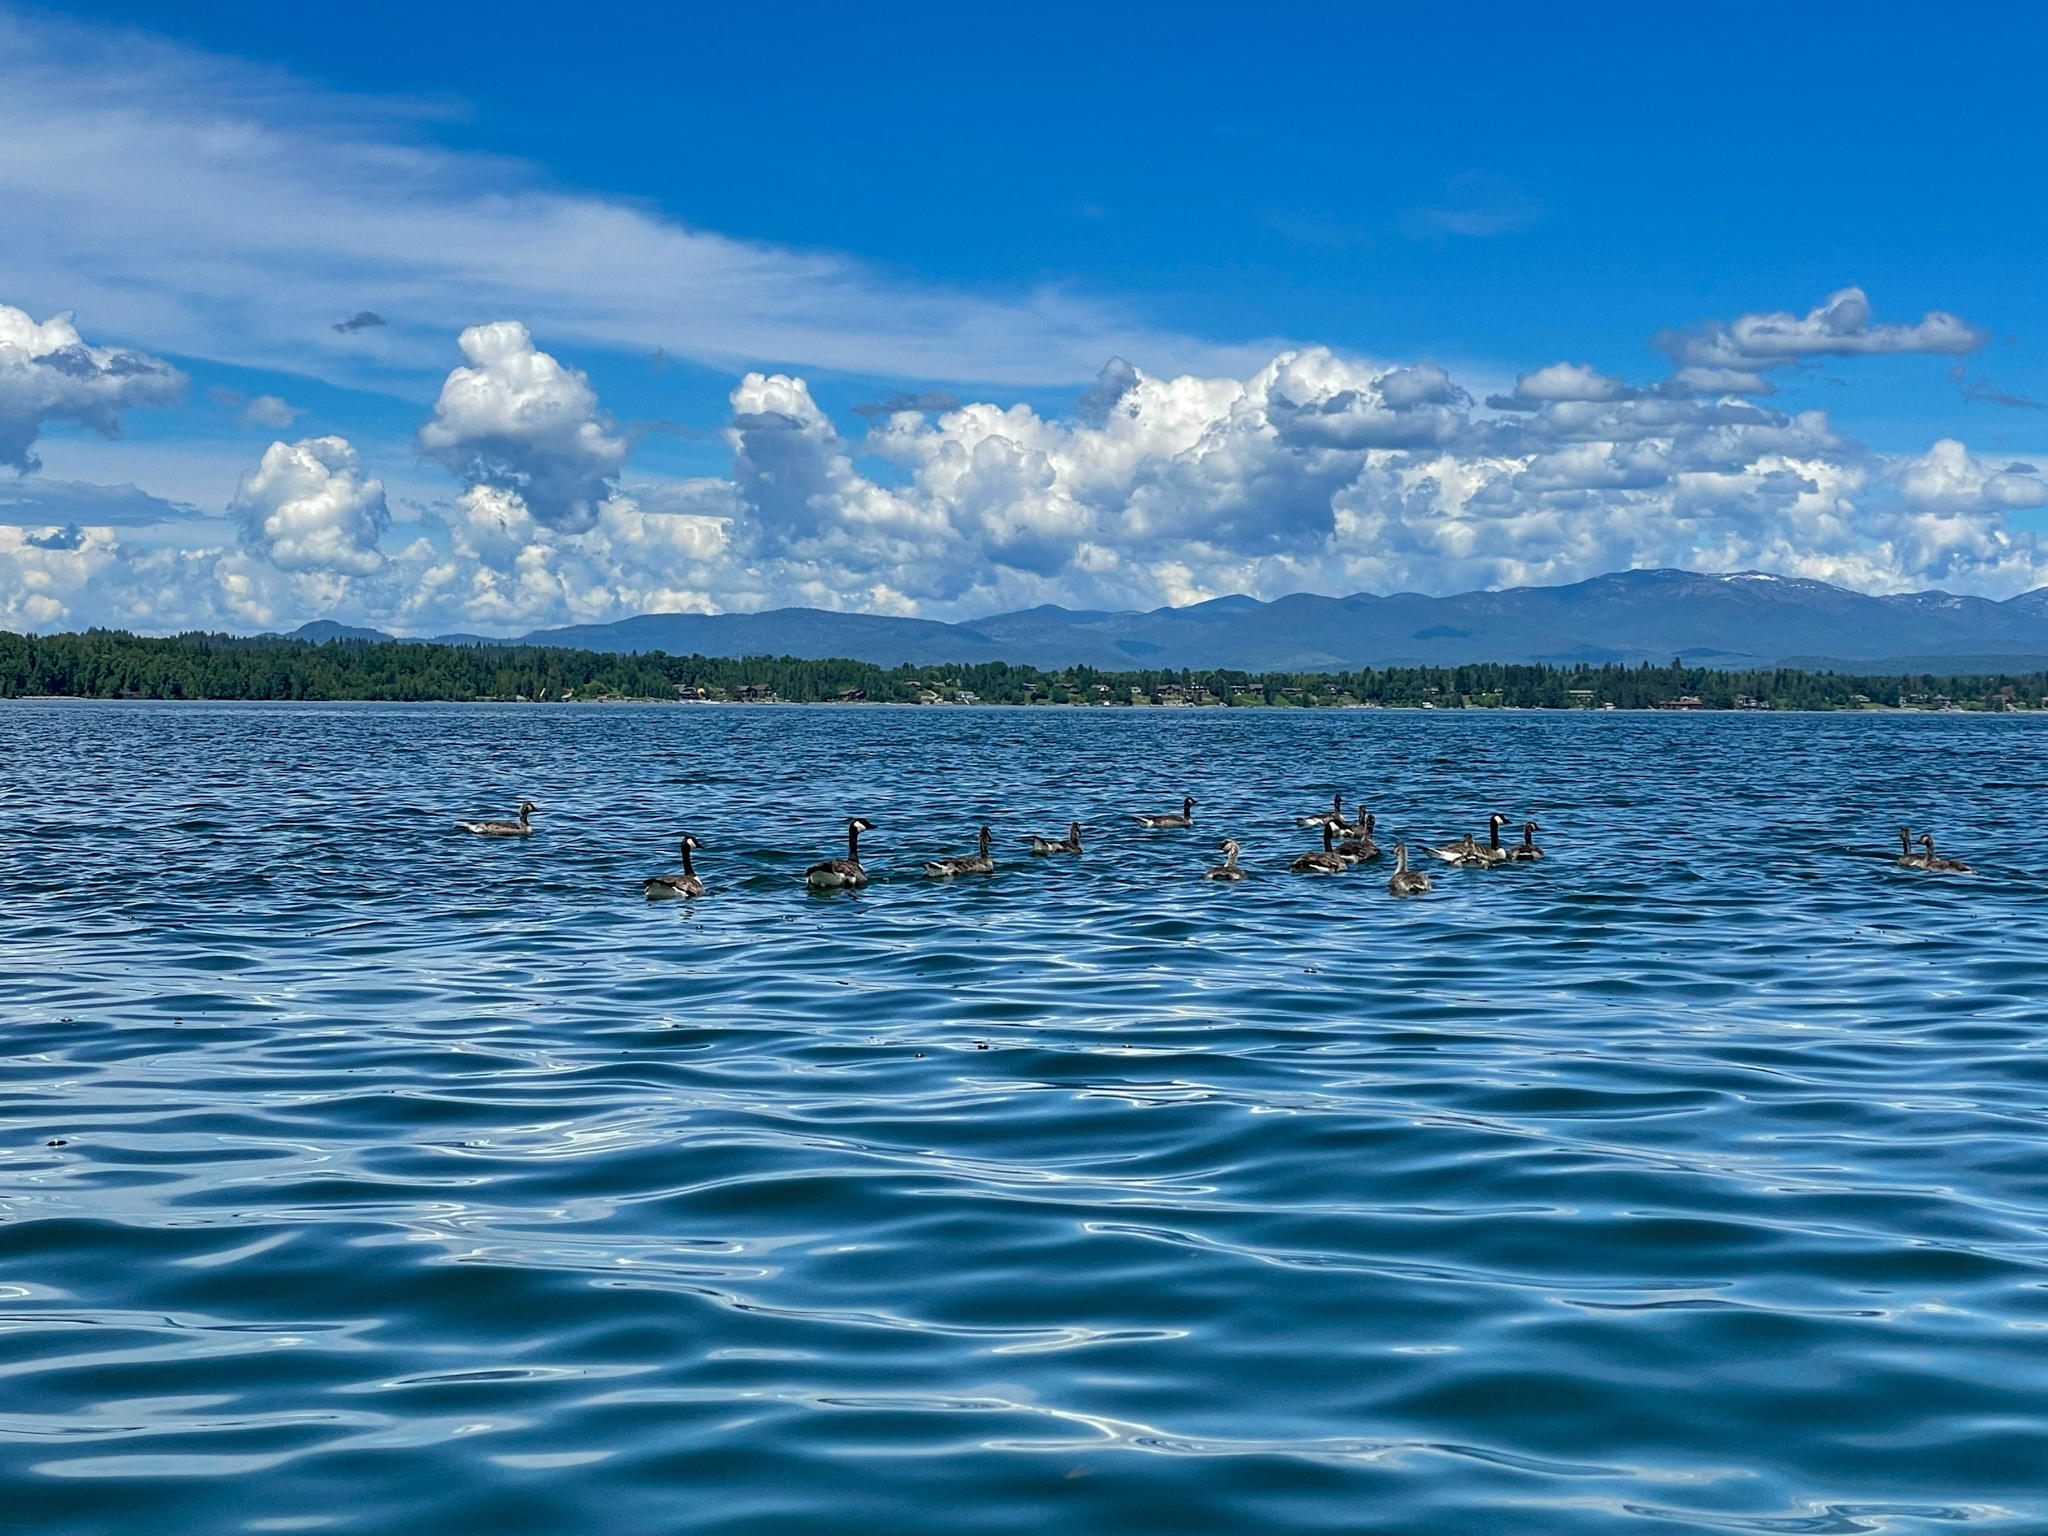 geese swim in lake Pond oreille